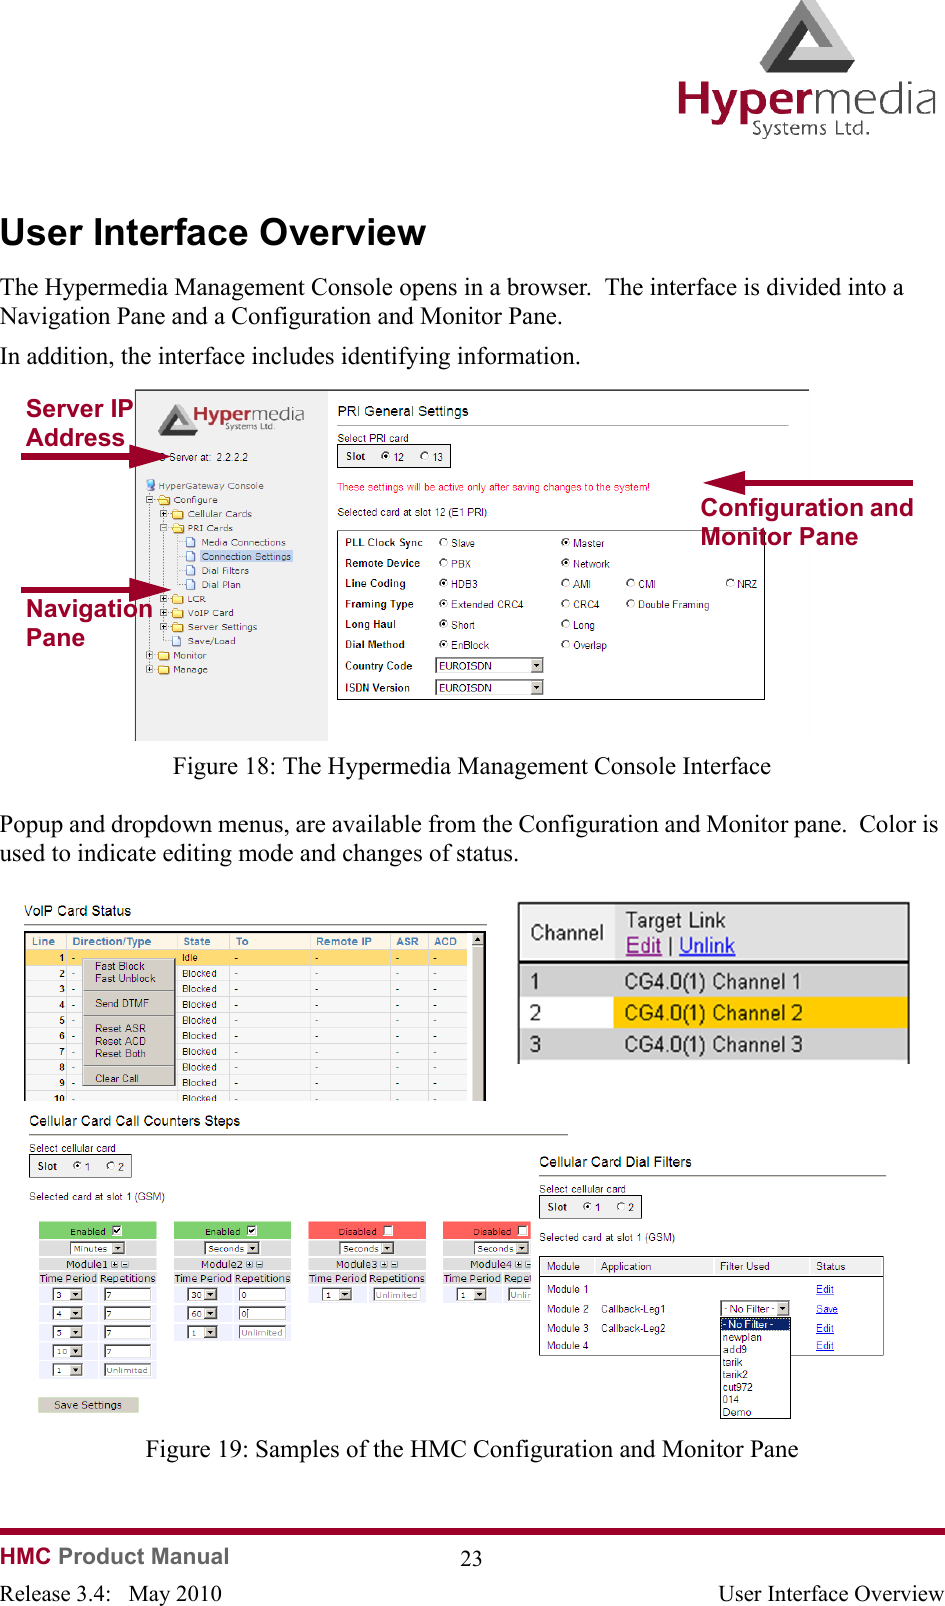 HMC Product Manual  23Release 3.4:   May 2010 User Interface OverviewUser Interface OverviewThe Hypermedia Management Console opens in a browser.  The interface is divided into a Navigation Pane and a Configuration and Monitor Pane.In addition, the interface includes identifying information.              Figure 18: The Hypermedia Management Console InterfacePopup and dropdown menus, are available from the Configuration and Monitor pane.  Color is used to indicate editing mode and changes of status.              Figure 19: Samples of the HMC Configuration and Monitor PaneNavigation PaneServer IP AddressConfiguration and Monitor Pane